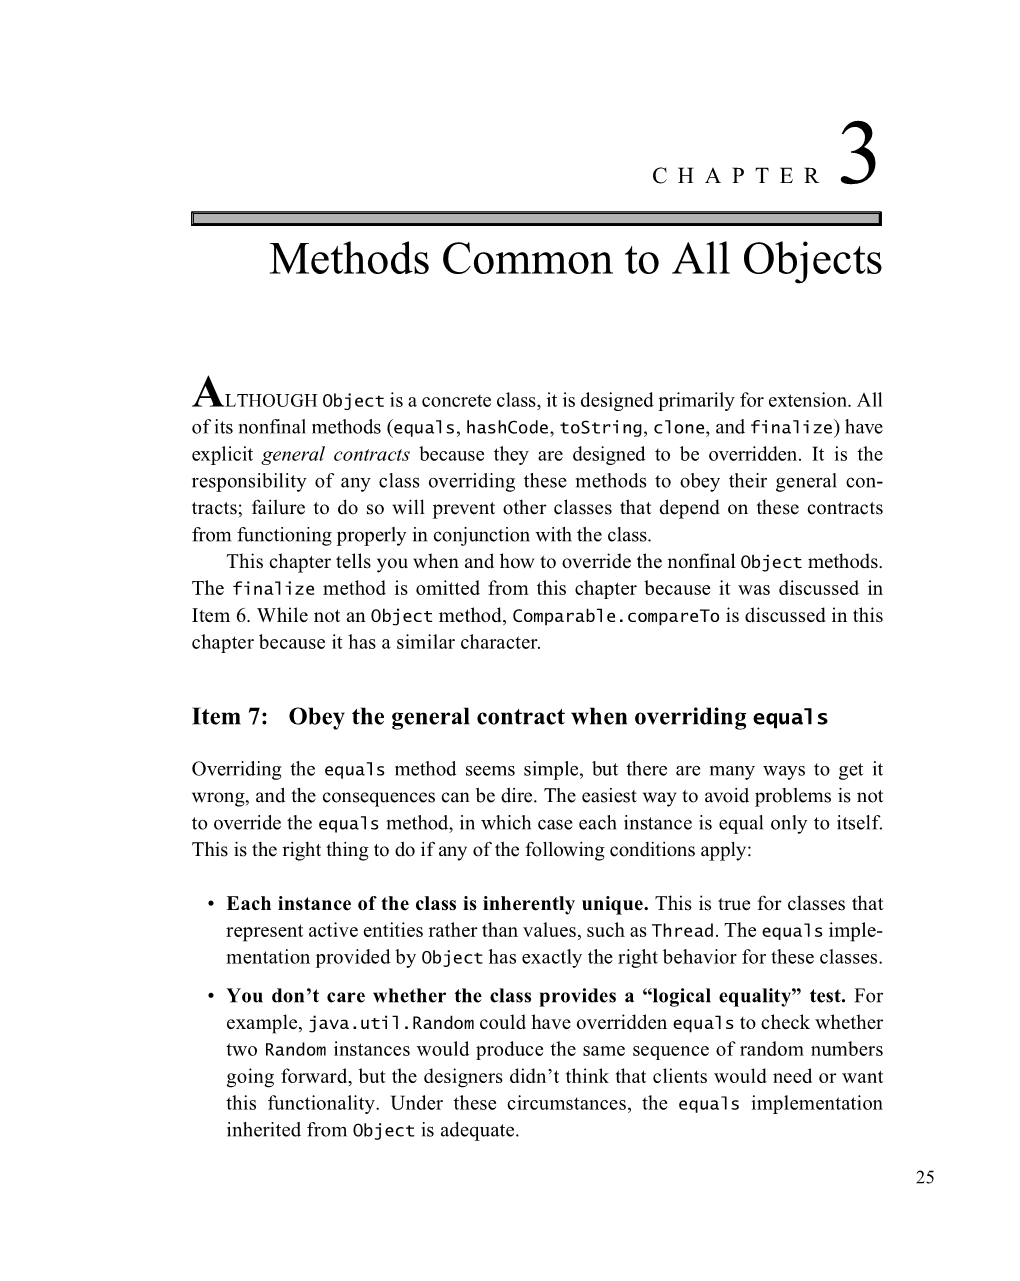 Chapter 3: Methods Common to All Objects